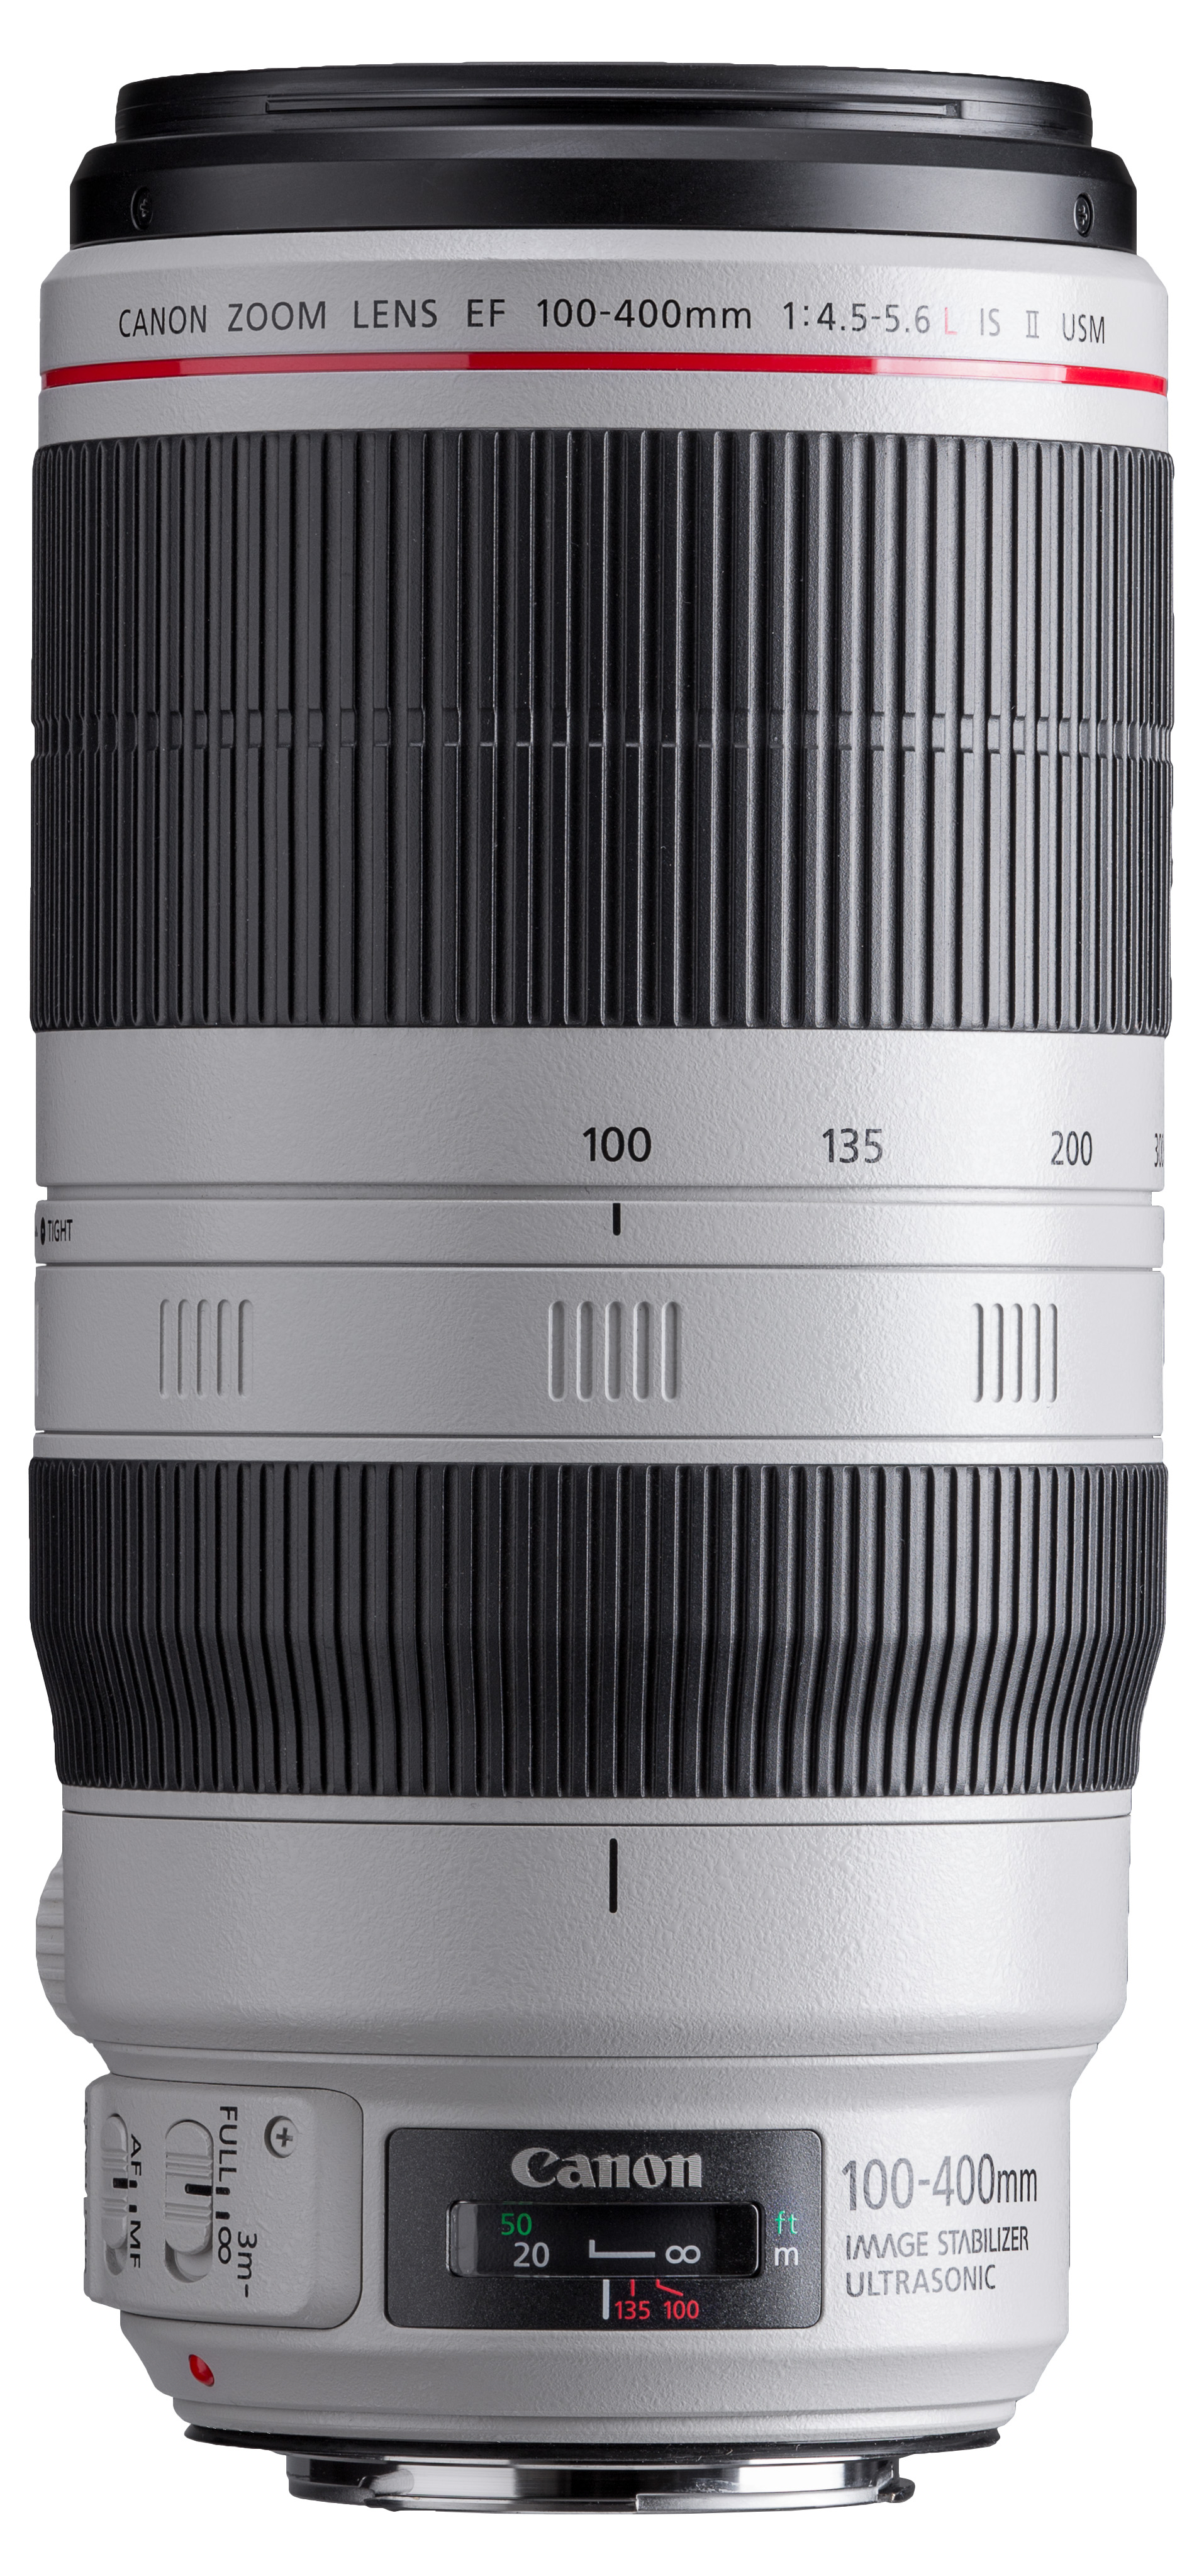 File Canon Ef 100 400mm F4 5 5 6l Is Ii Usm Front Horizontal Jpg Wikimedia Commons